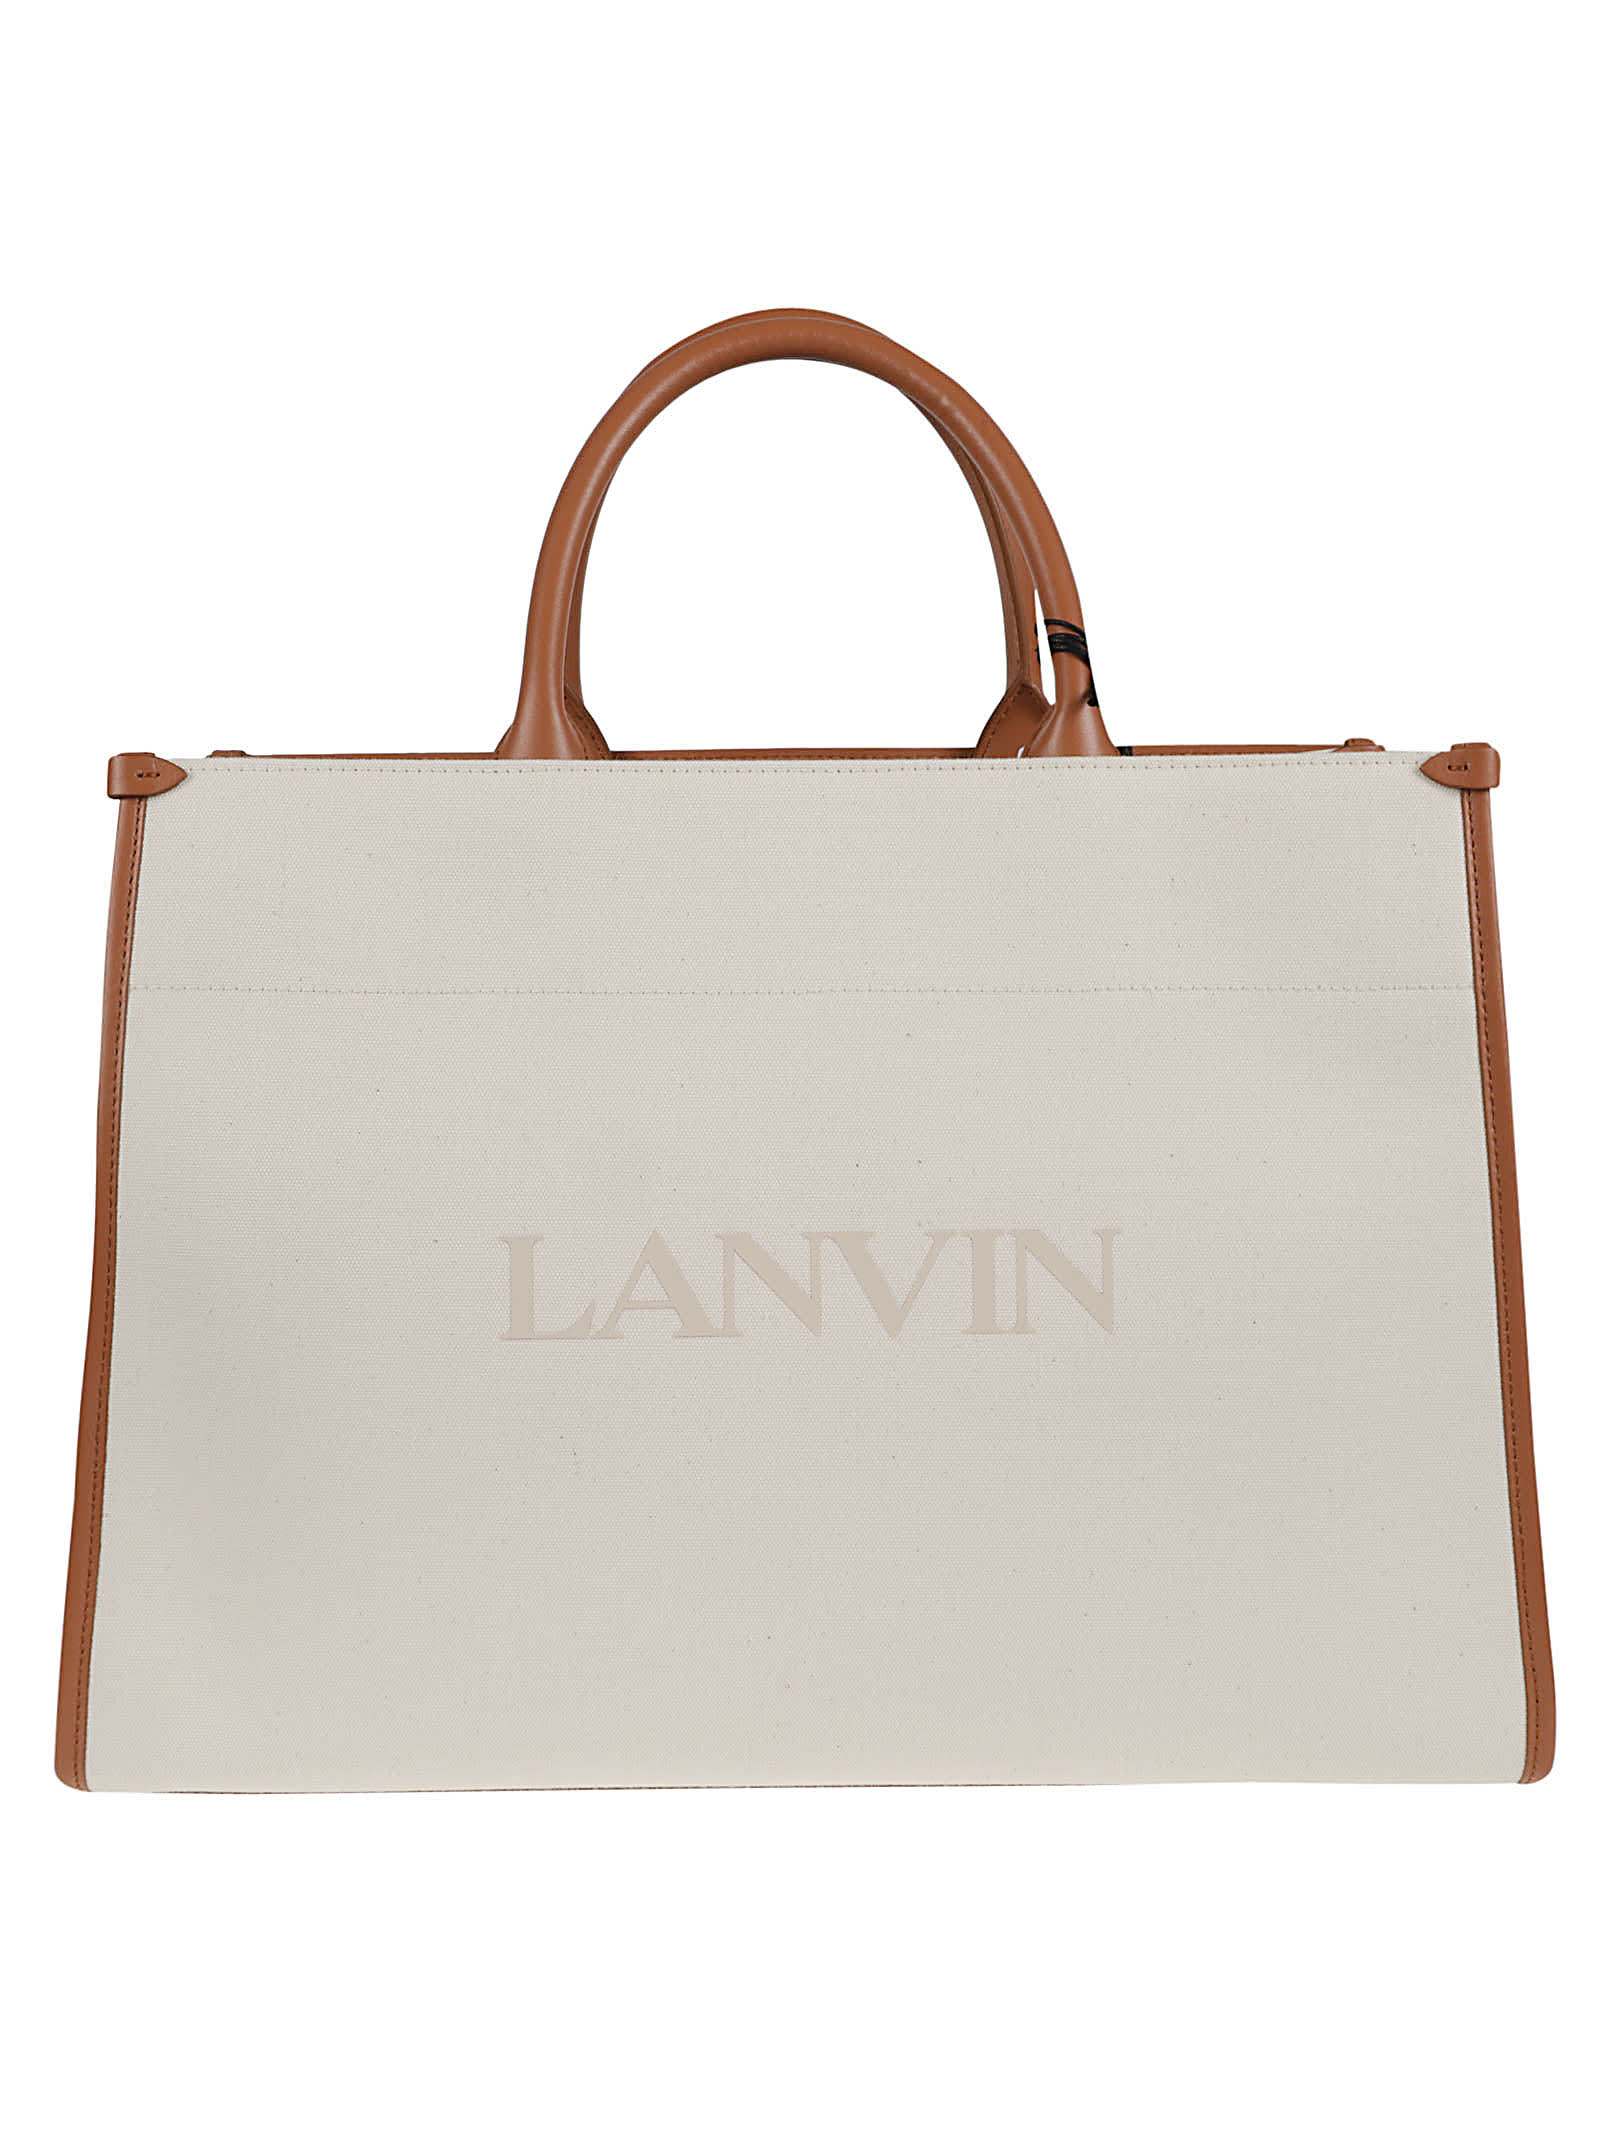 Lanvin Avec Bandouliere Sac Tote In Off White